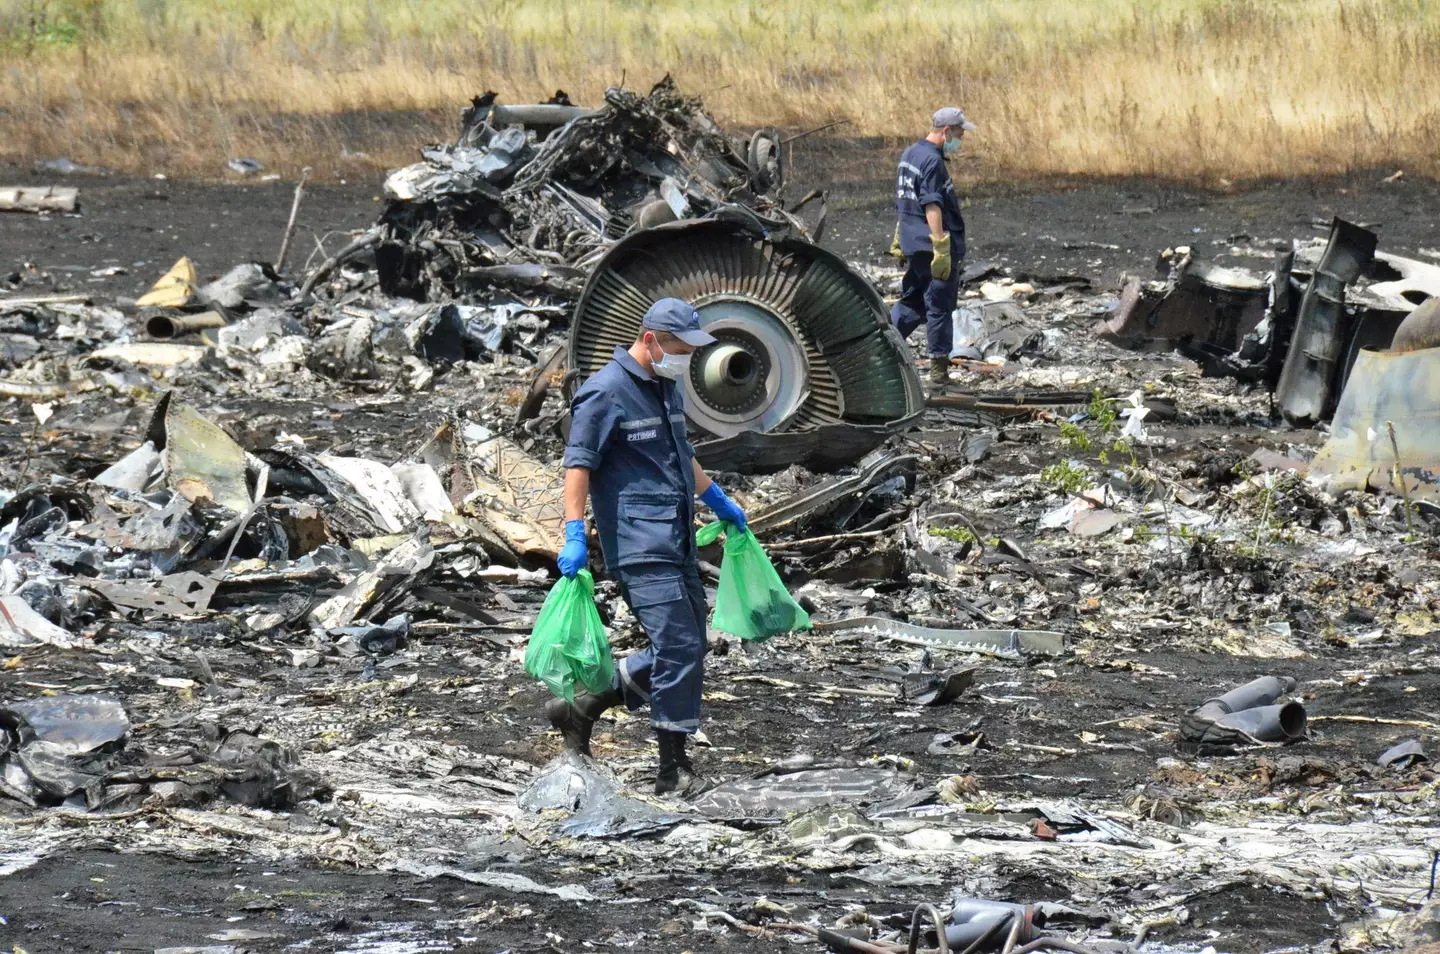 Photo taken July 20, 2014, shows the crash site in Hrabove, Ukraine of Malaysia Airlines Flight MH17, which was shot down over Ukraine.